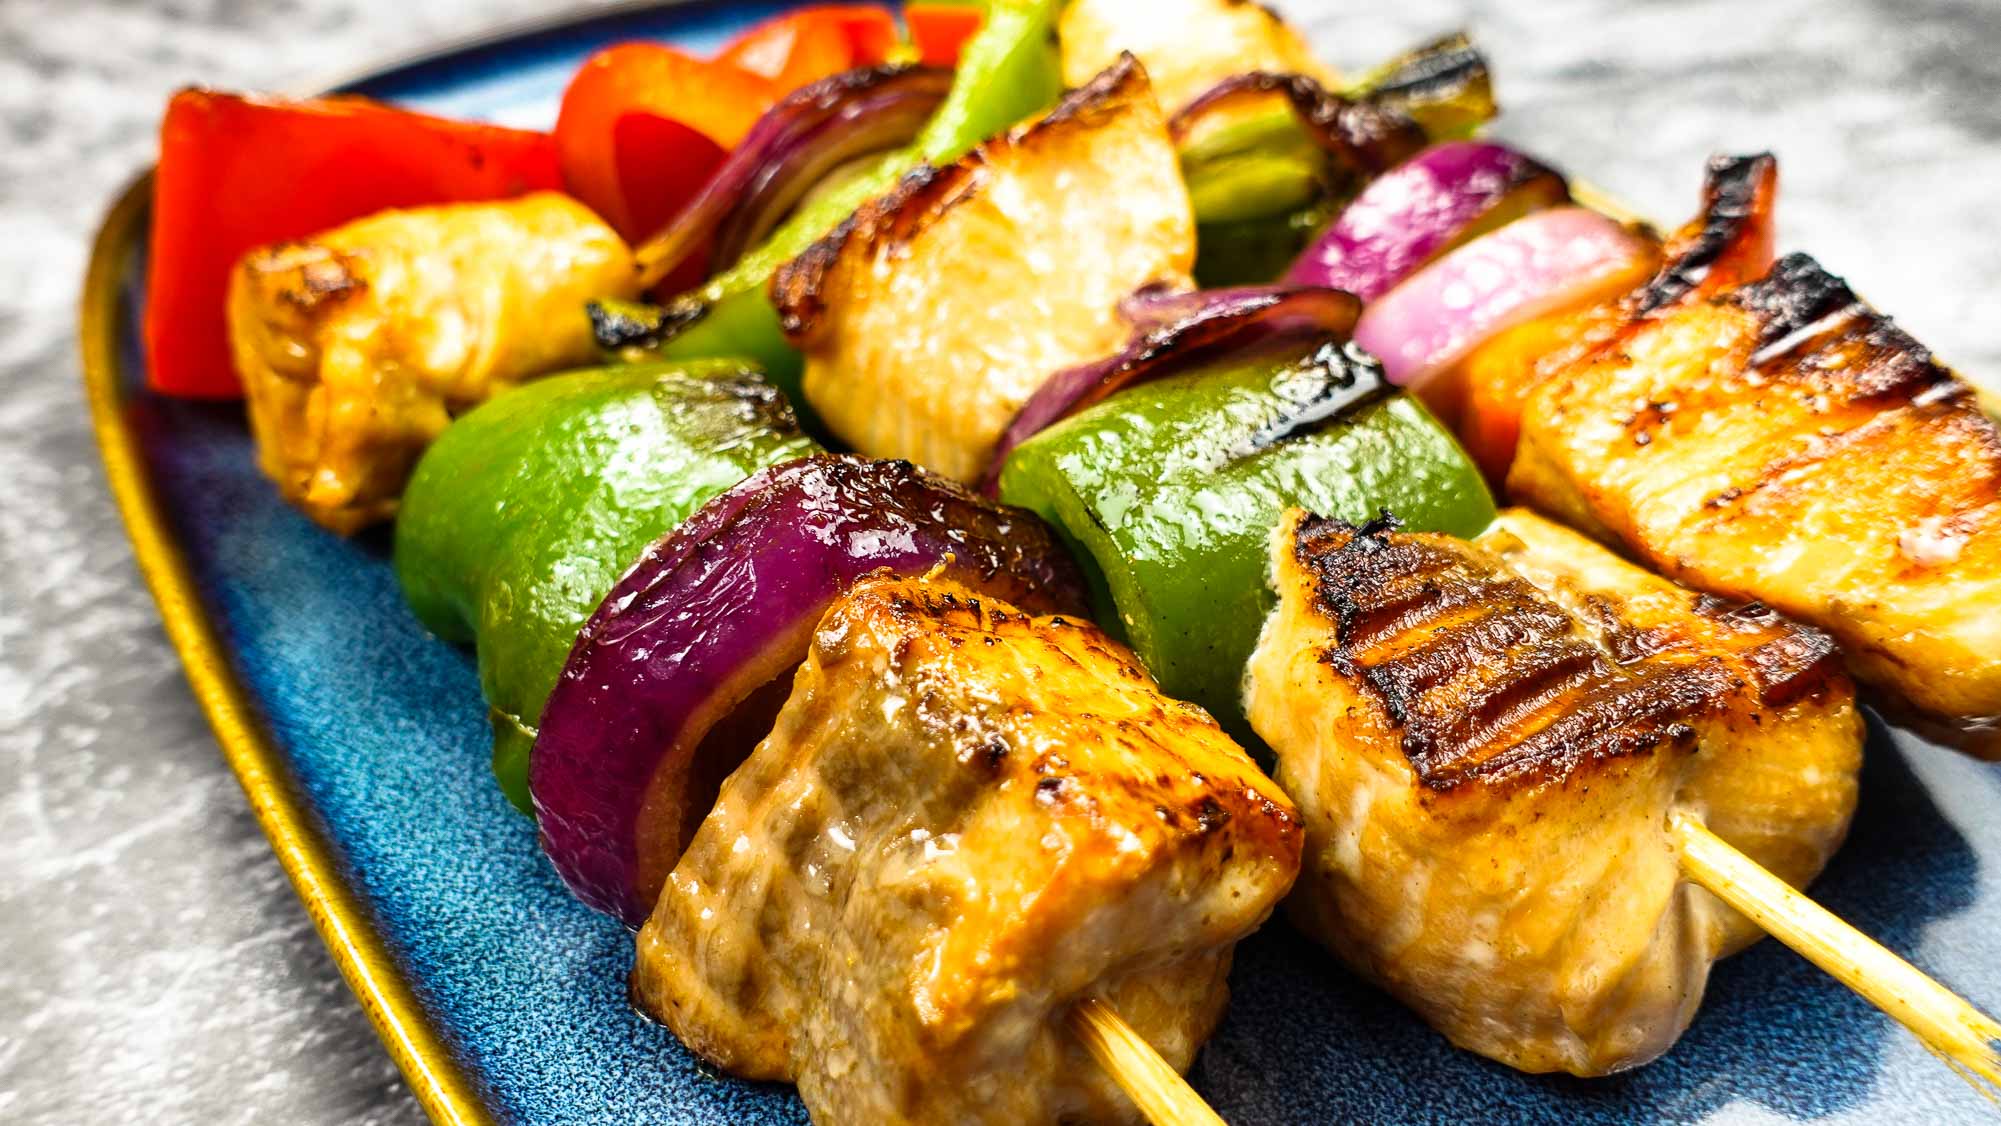 Skewers with meat and vegetables on sticks.